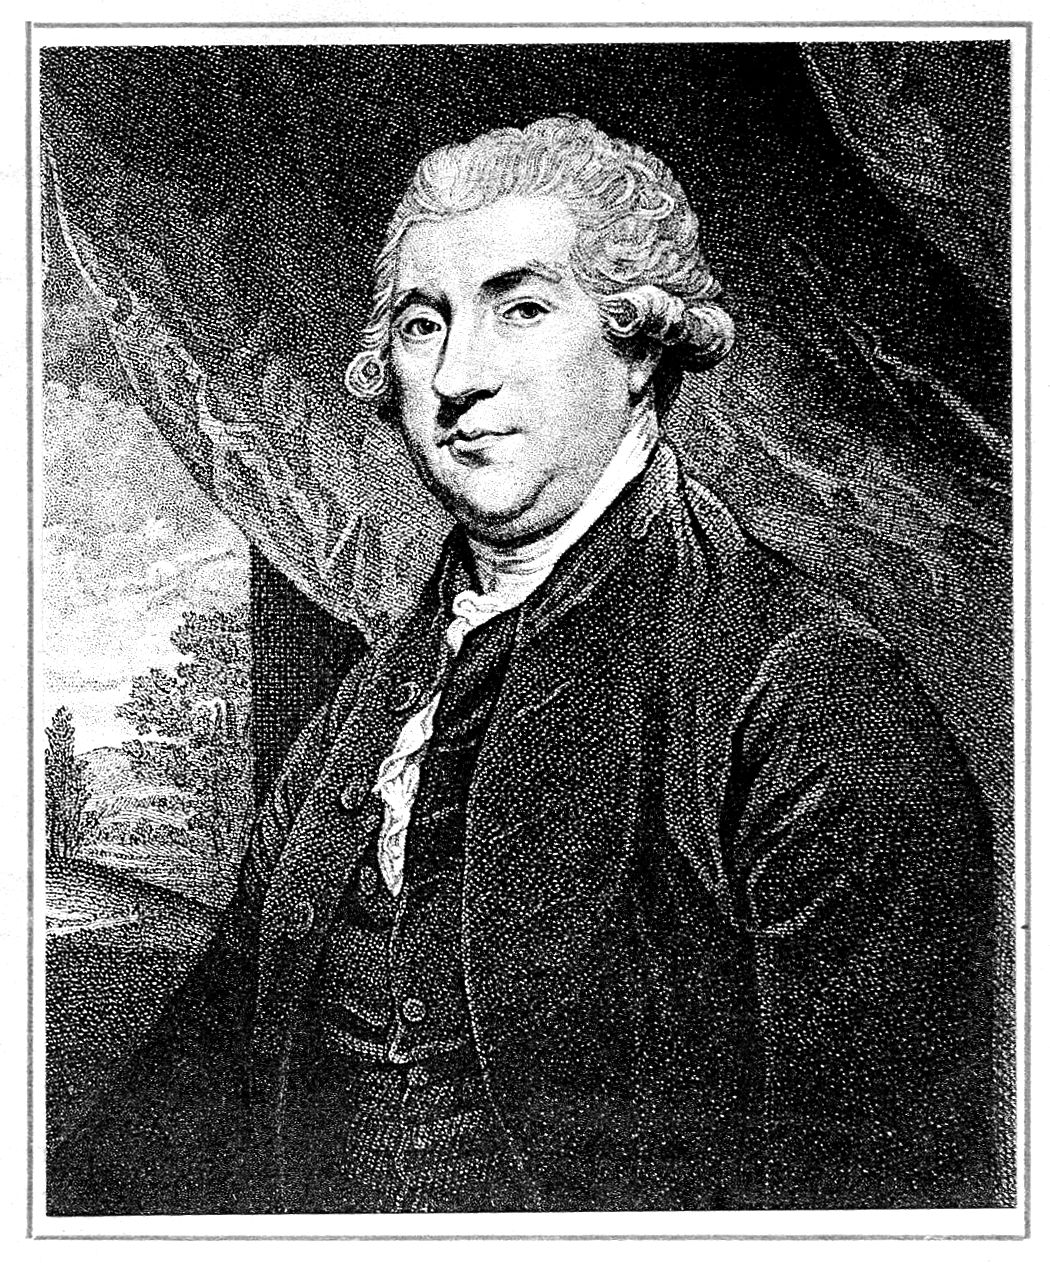 Portrait of James Boswell